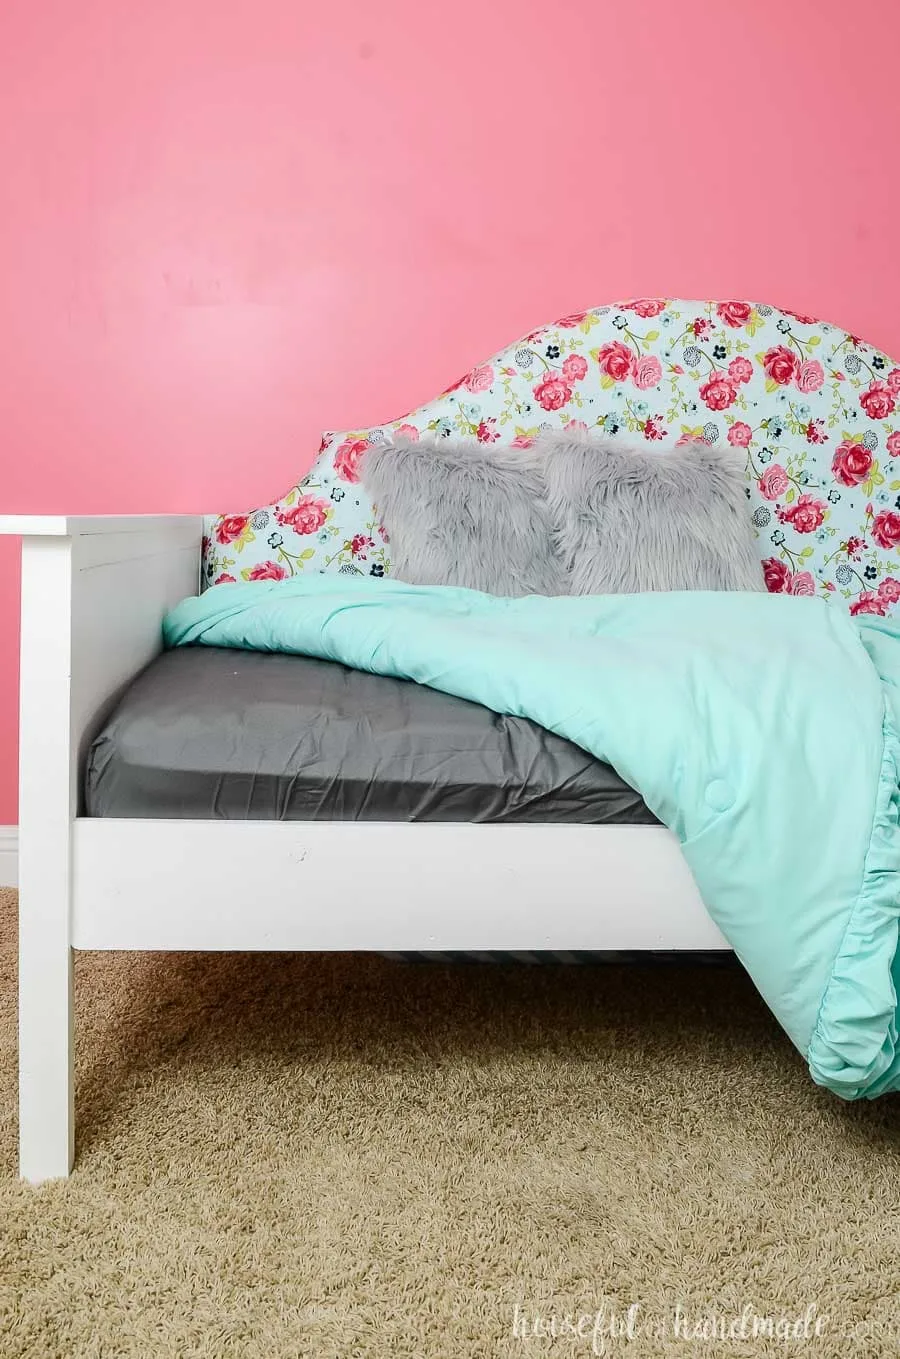 Day beds are the perfect bed for a small room or spare room. You can easily make them into seating during the day, they sit against a wall to take up less space, but you can quickly climb into bed to sleep. Plenty of room for storage or a trundle underneath. Get the free build plans at Housefulofhandmade.com.